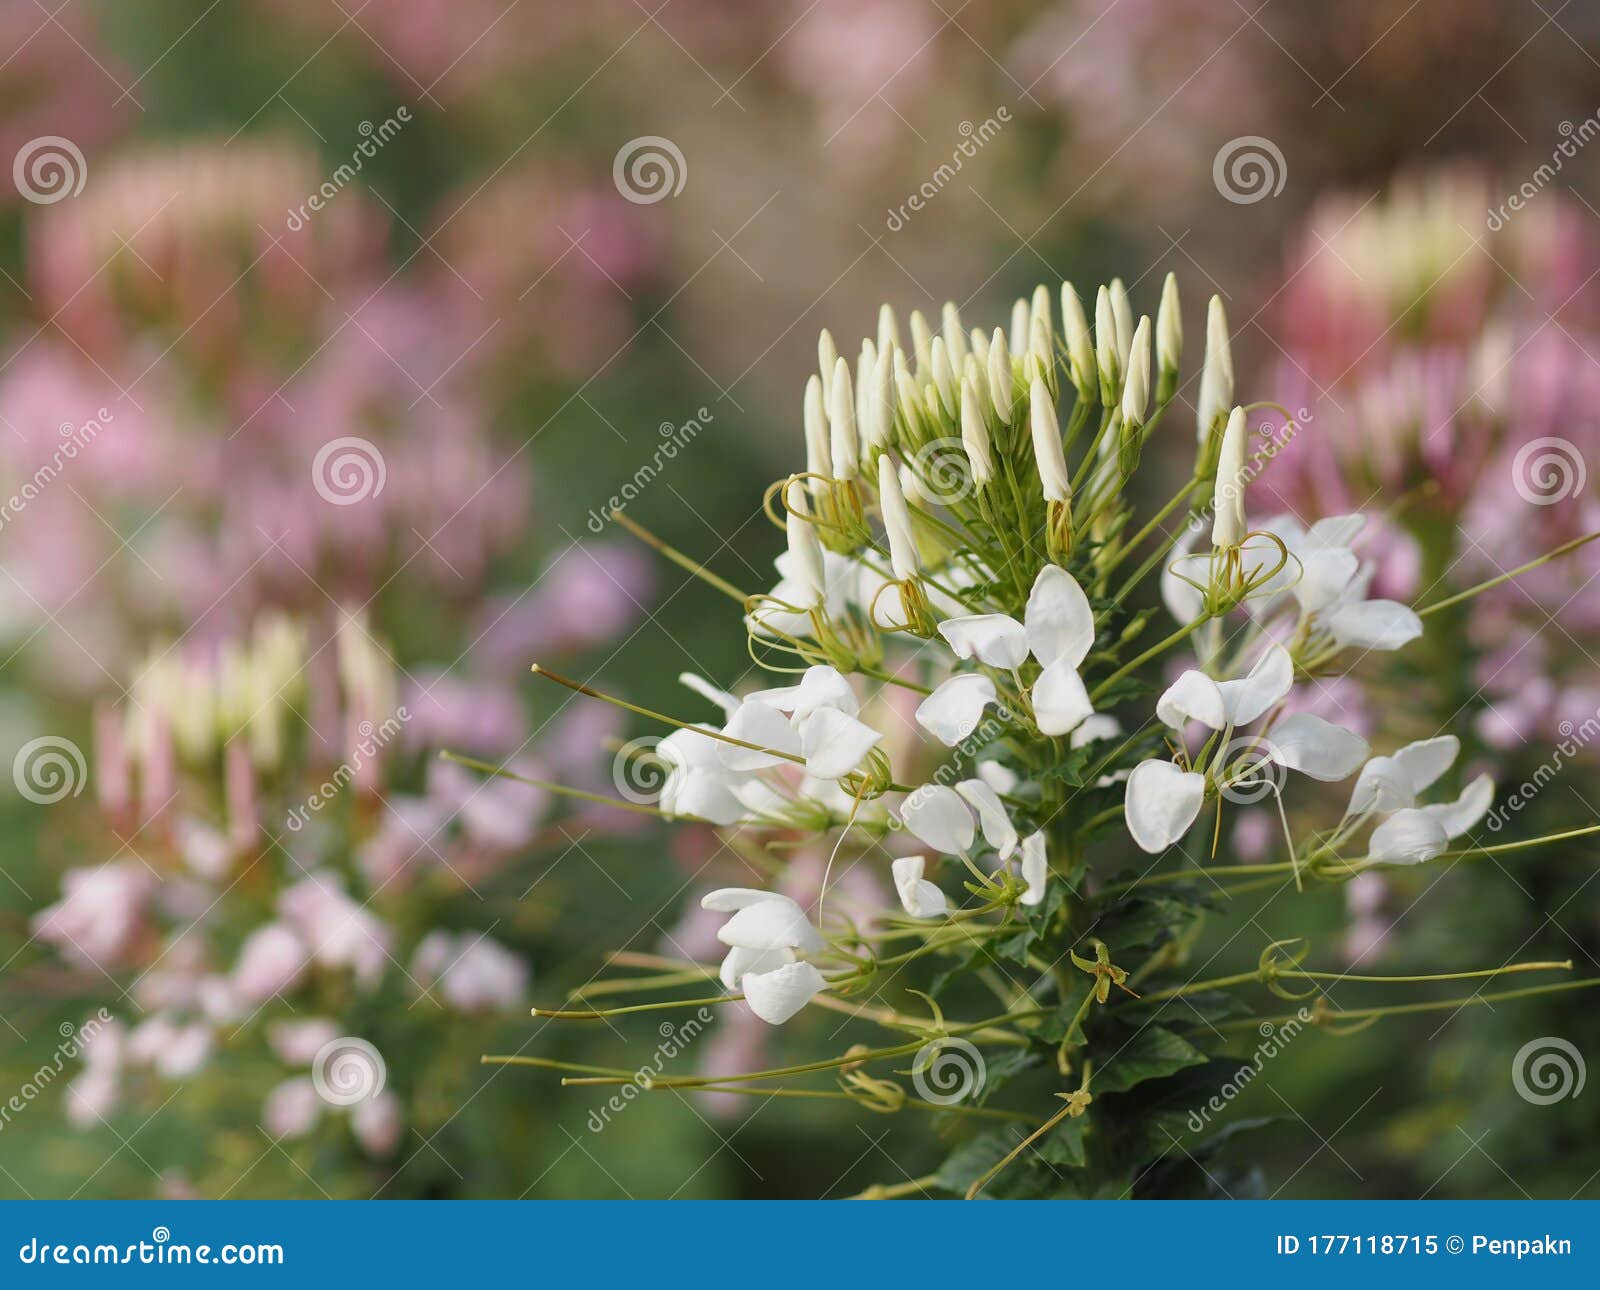 Cleome Hassleriana Spider Flower Spider Plant Flowering Plant In Genus Cleome Of The Family Cleomaceae White Color Flowers In Stock Image Image Of Flowers Botany 177118715